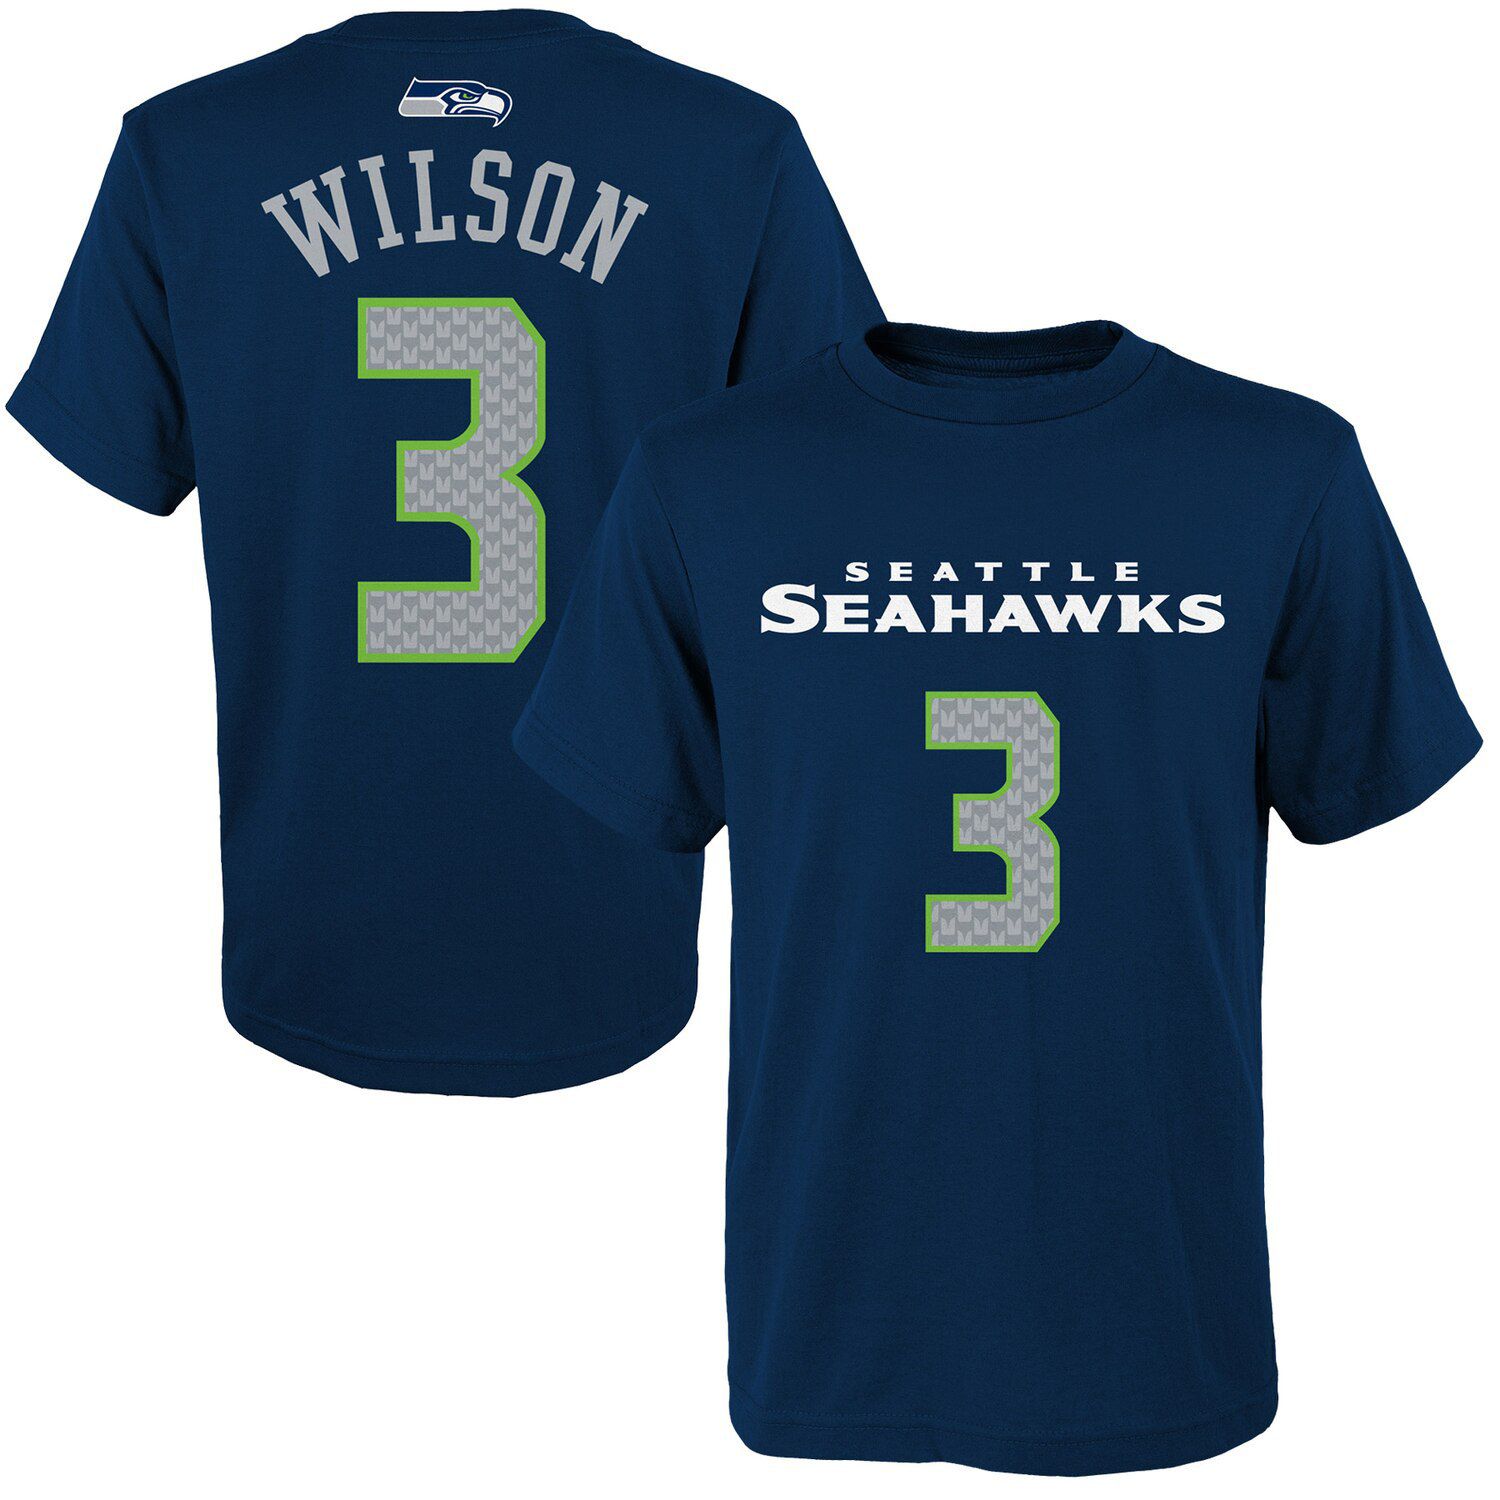 youth large russell wilson jersey